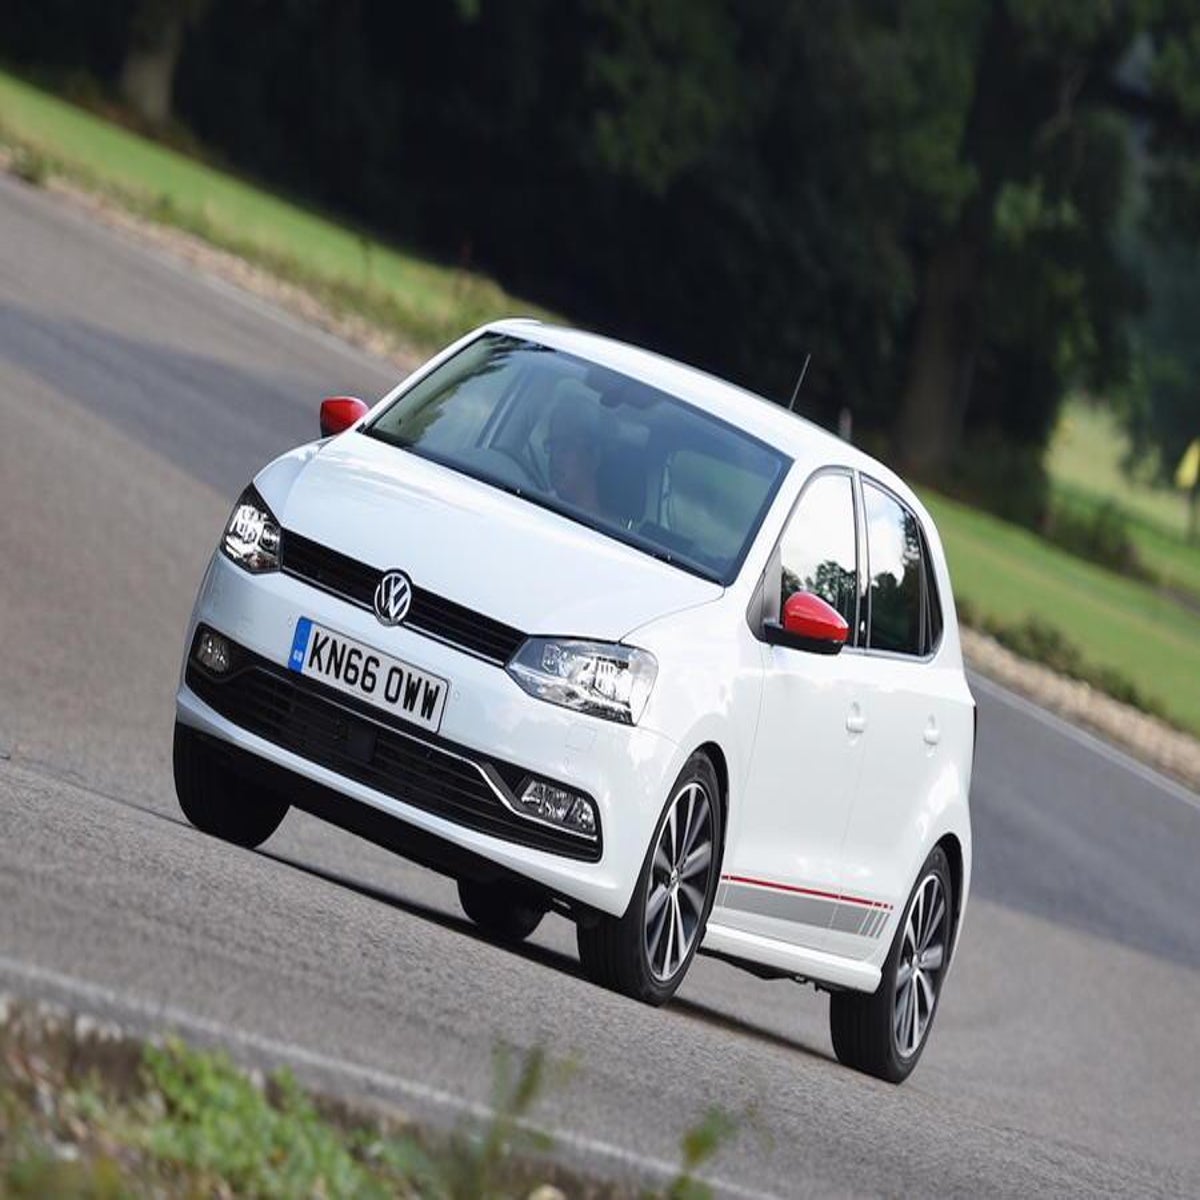 Volkswagen Polo review: better than a Ford Fiesta?